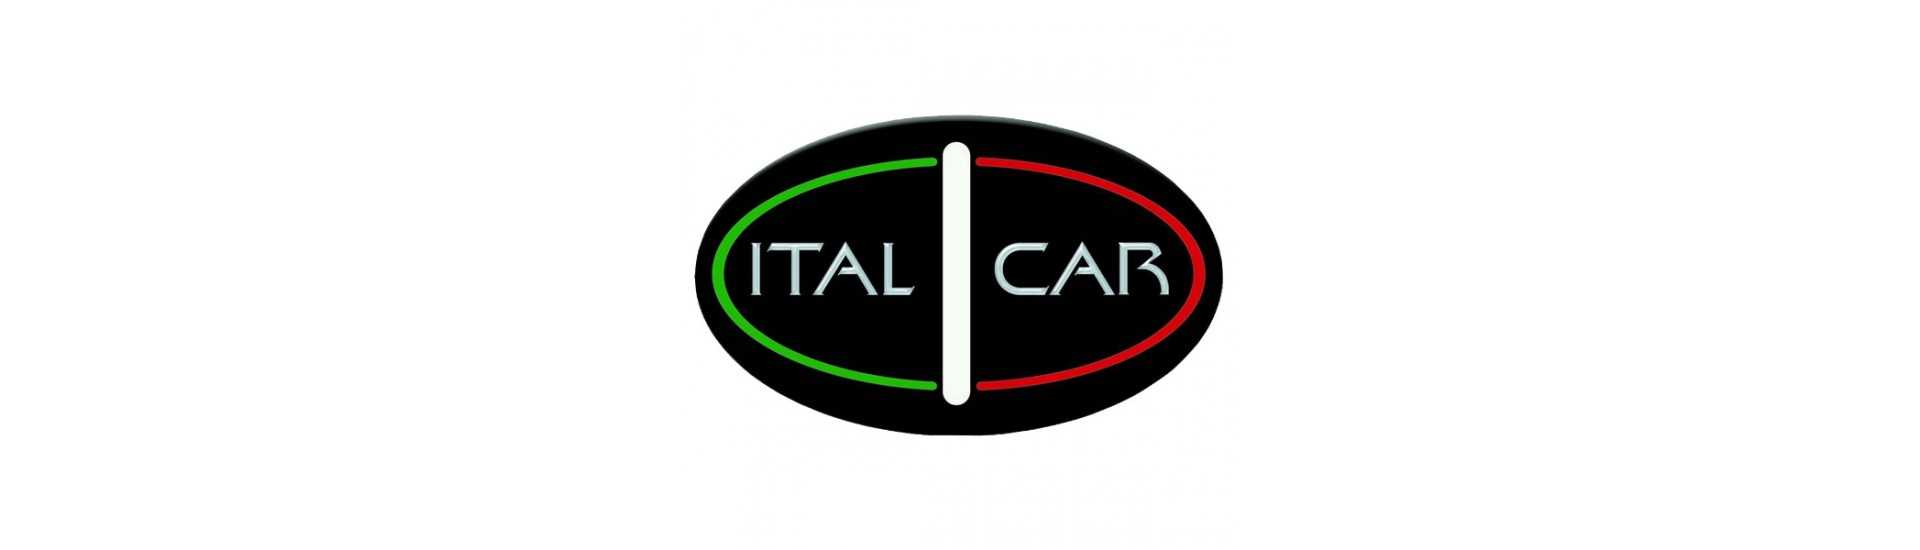 Door window at the best price for car without a permit Italcar